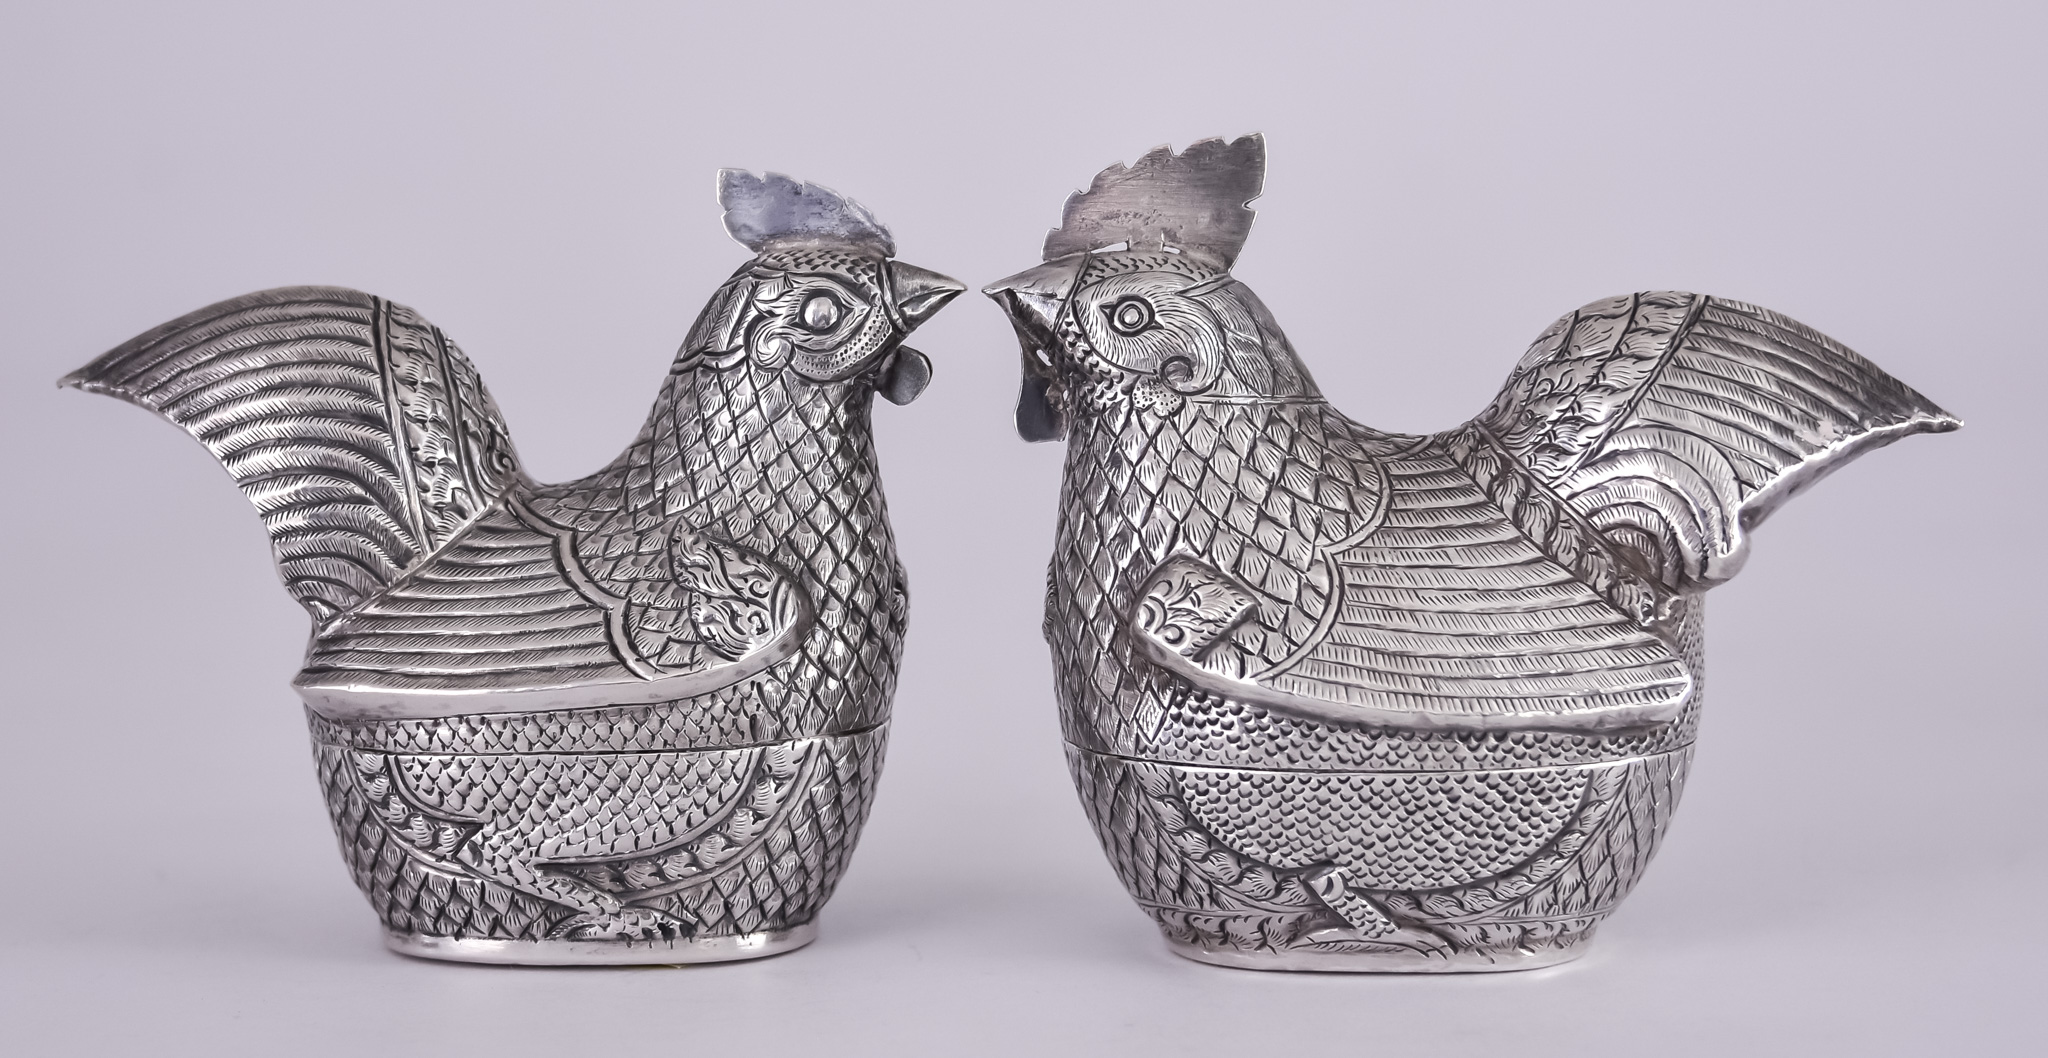 Two 20th Century Cambodian Silvery Metal Hen Shaped Betel Boxes and Covers, each naturalistically